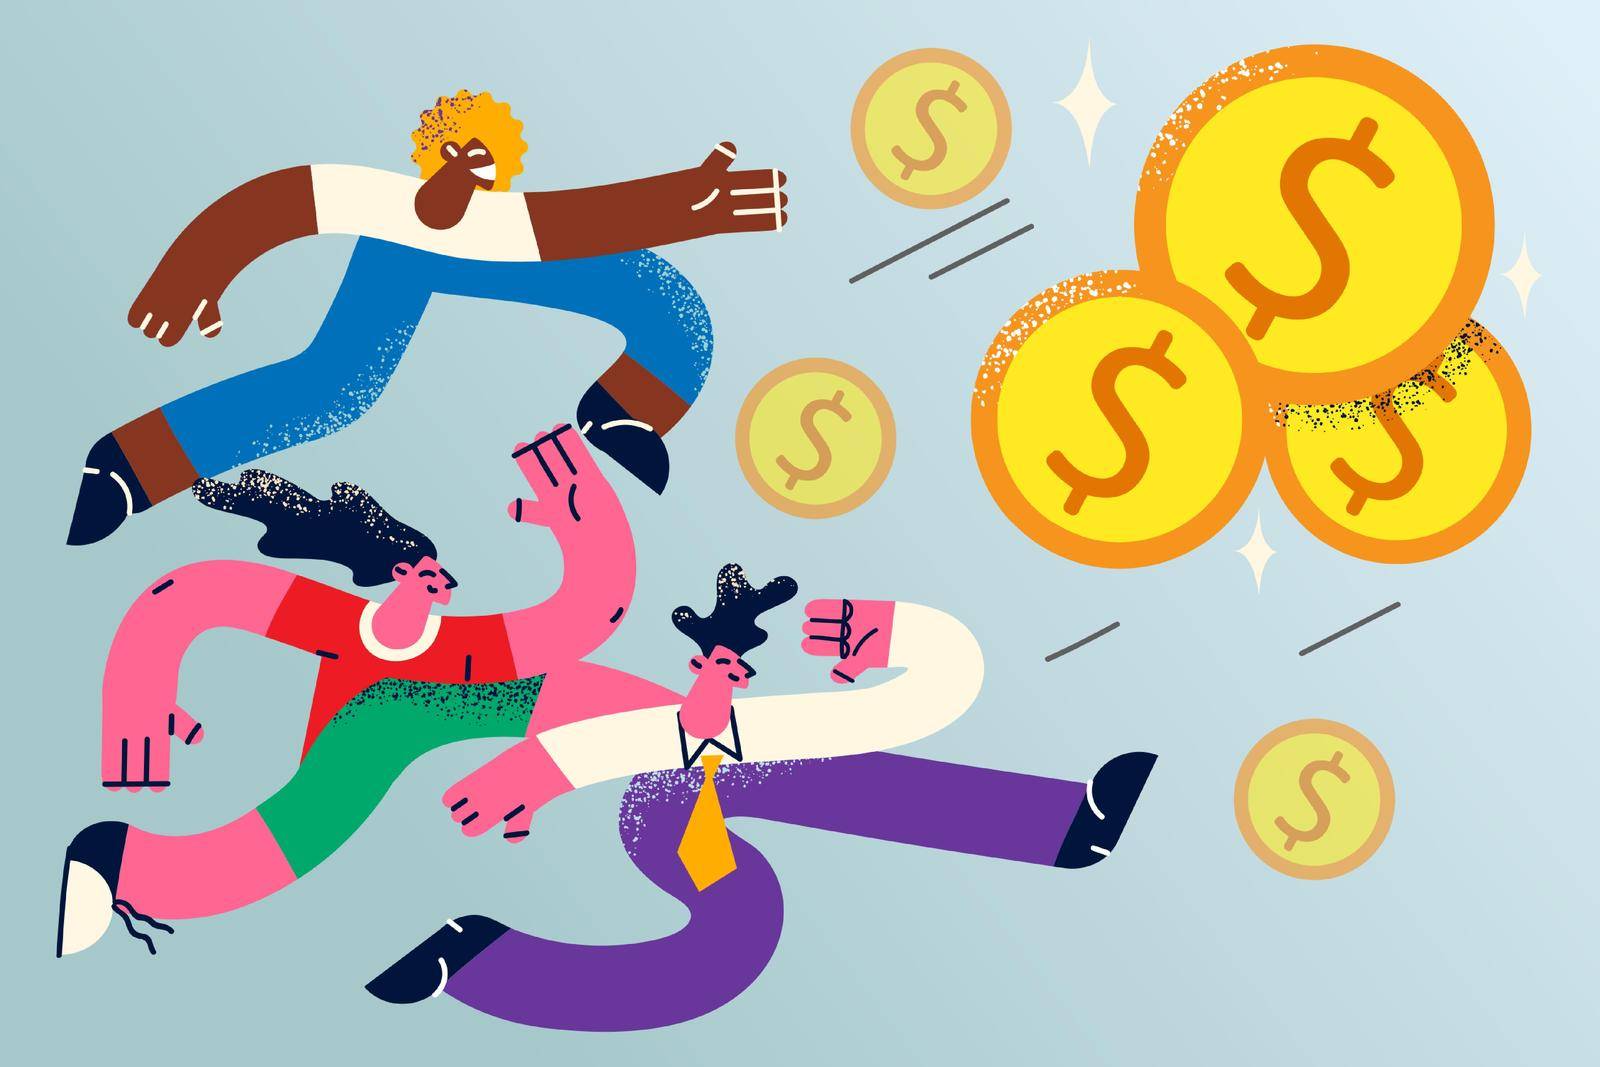 Diverse people run to get money strive for career success reach financial goal. Greedy employees in chase for cash and wealth. Competition and rivalry. Finance and banking. Vector illustration.